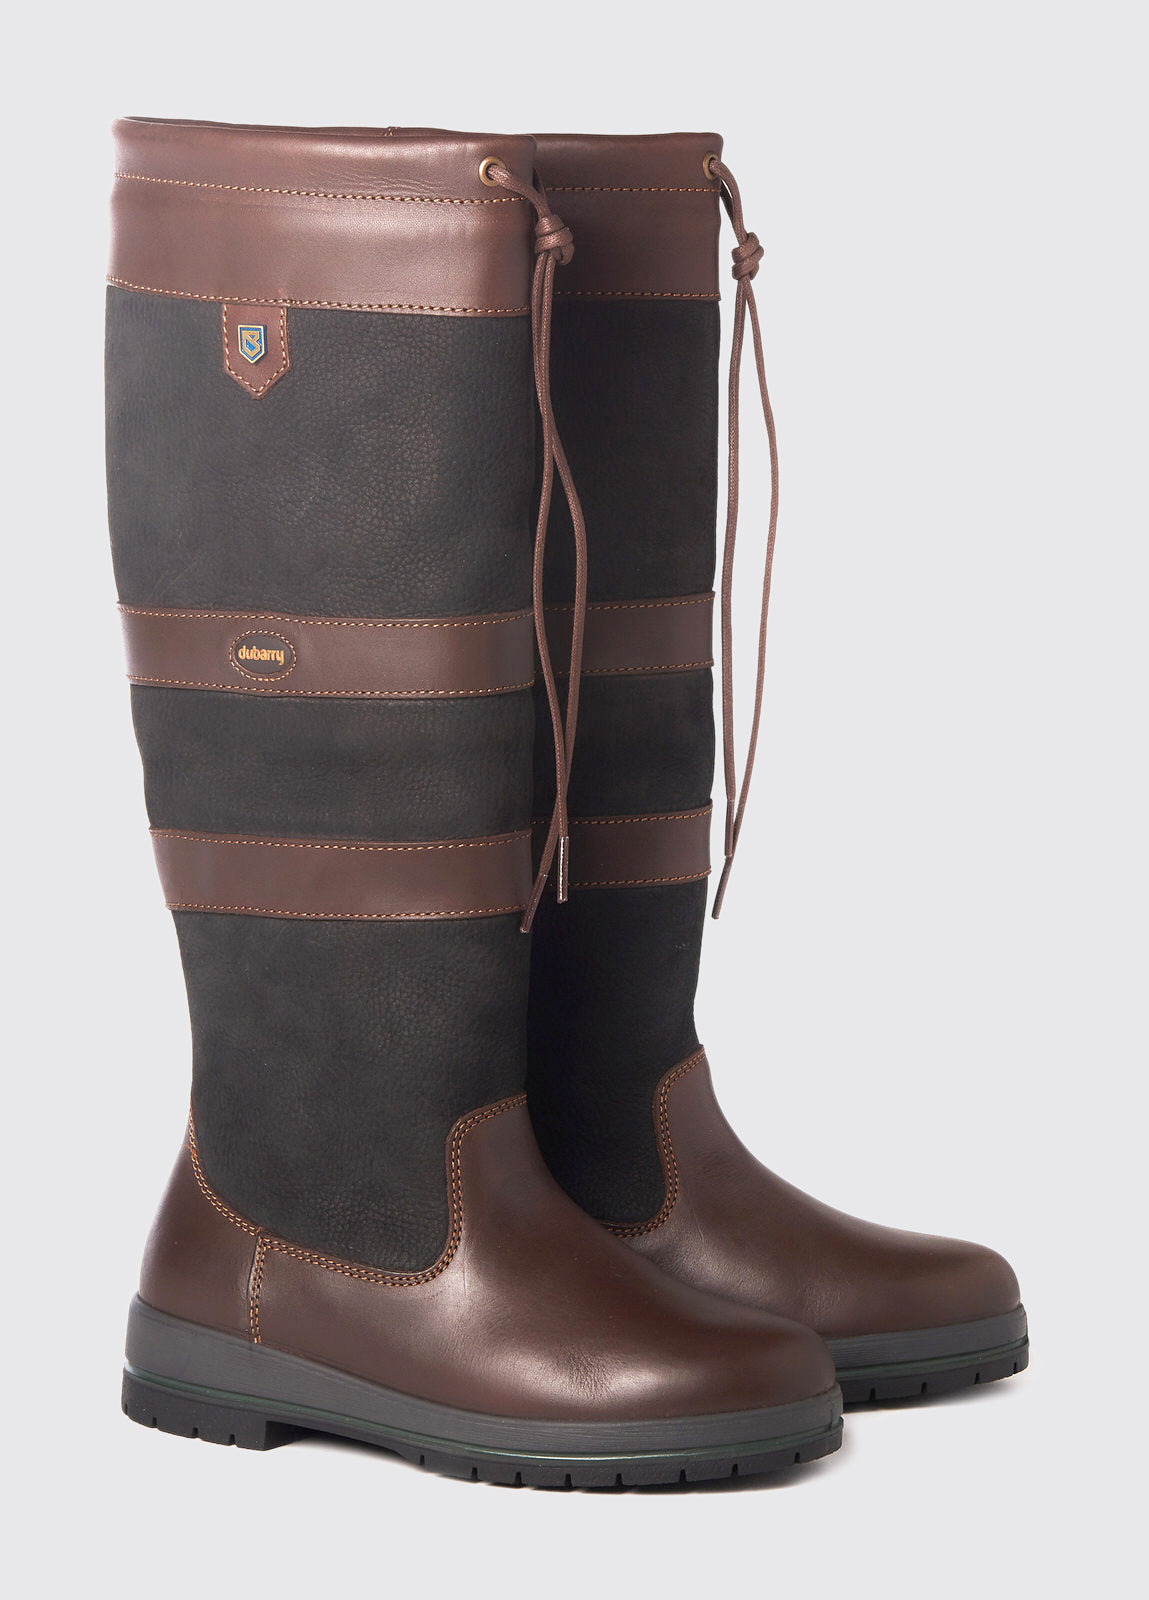 Dubarry Galway Boot Black/Brown Mrs Tea's Boutique and Bakery